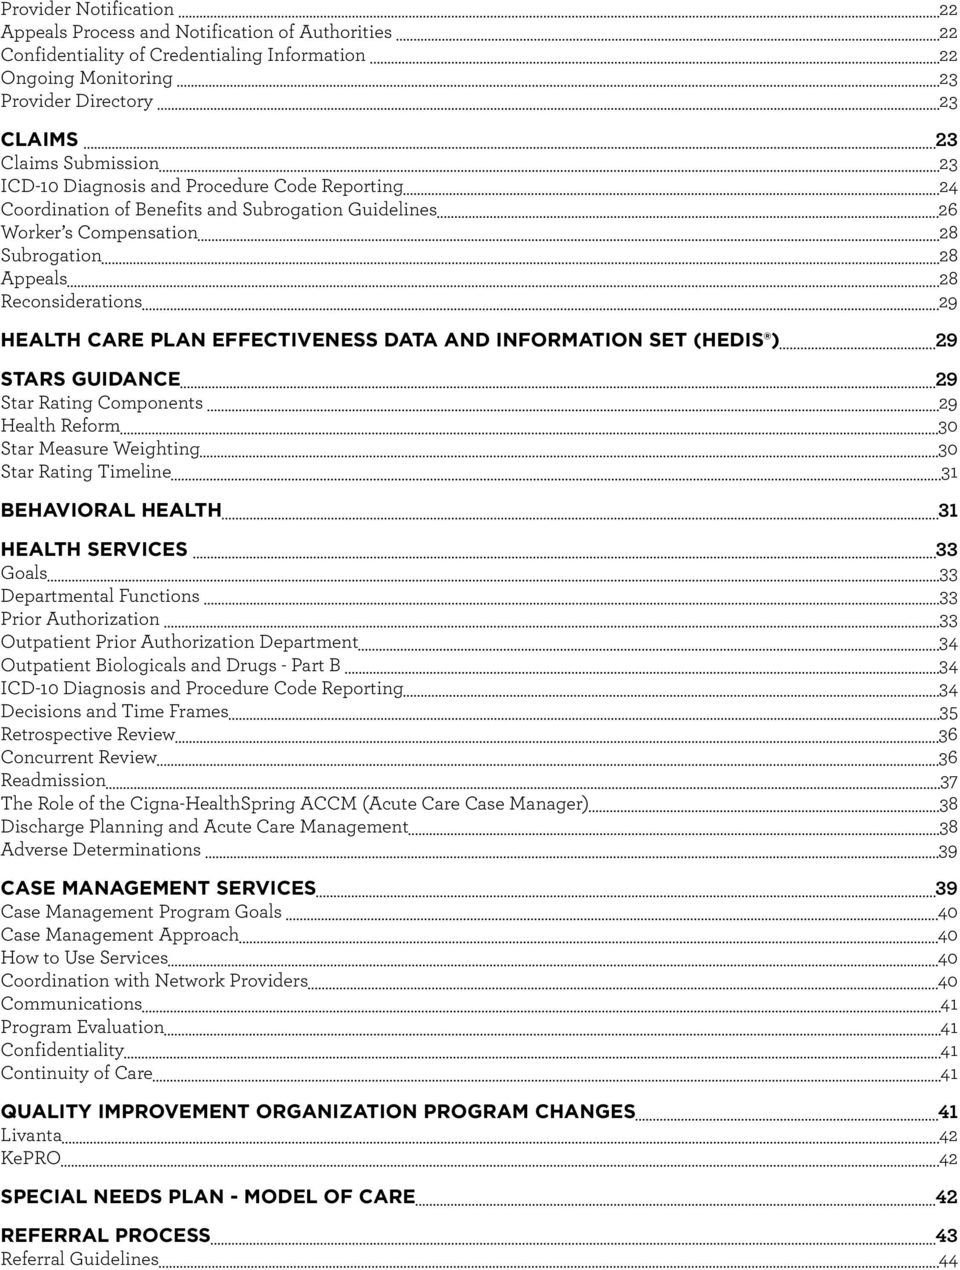 EFFECTIVENESS DATA AND INFORMATION SET (HEDIS ) 29 STARS GUIDANCE 29 Star Rating Components 29 Health Reform 30 Star Measure Weighting 30 Star Rating Timeline 31 BEHAVIORAL HEALTH 31 HEALTH SERVICES